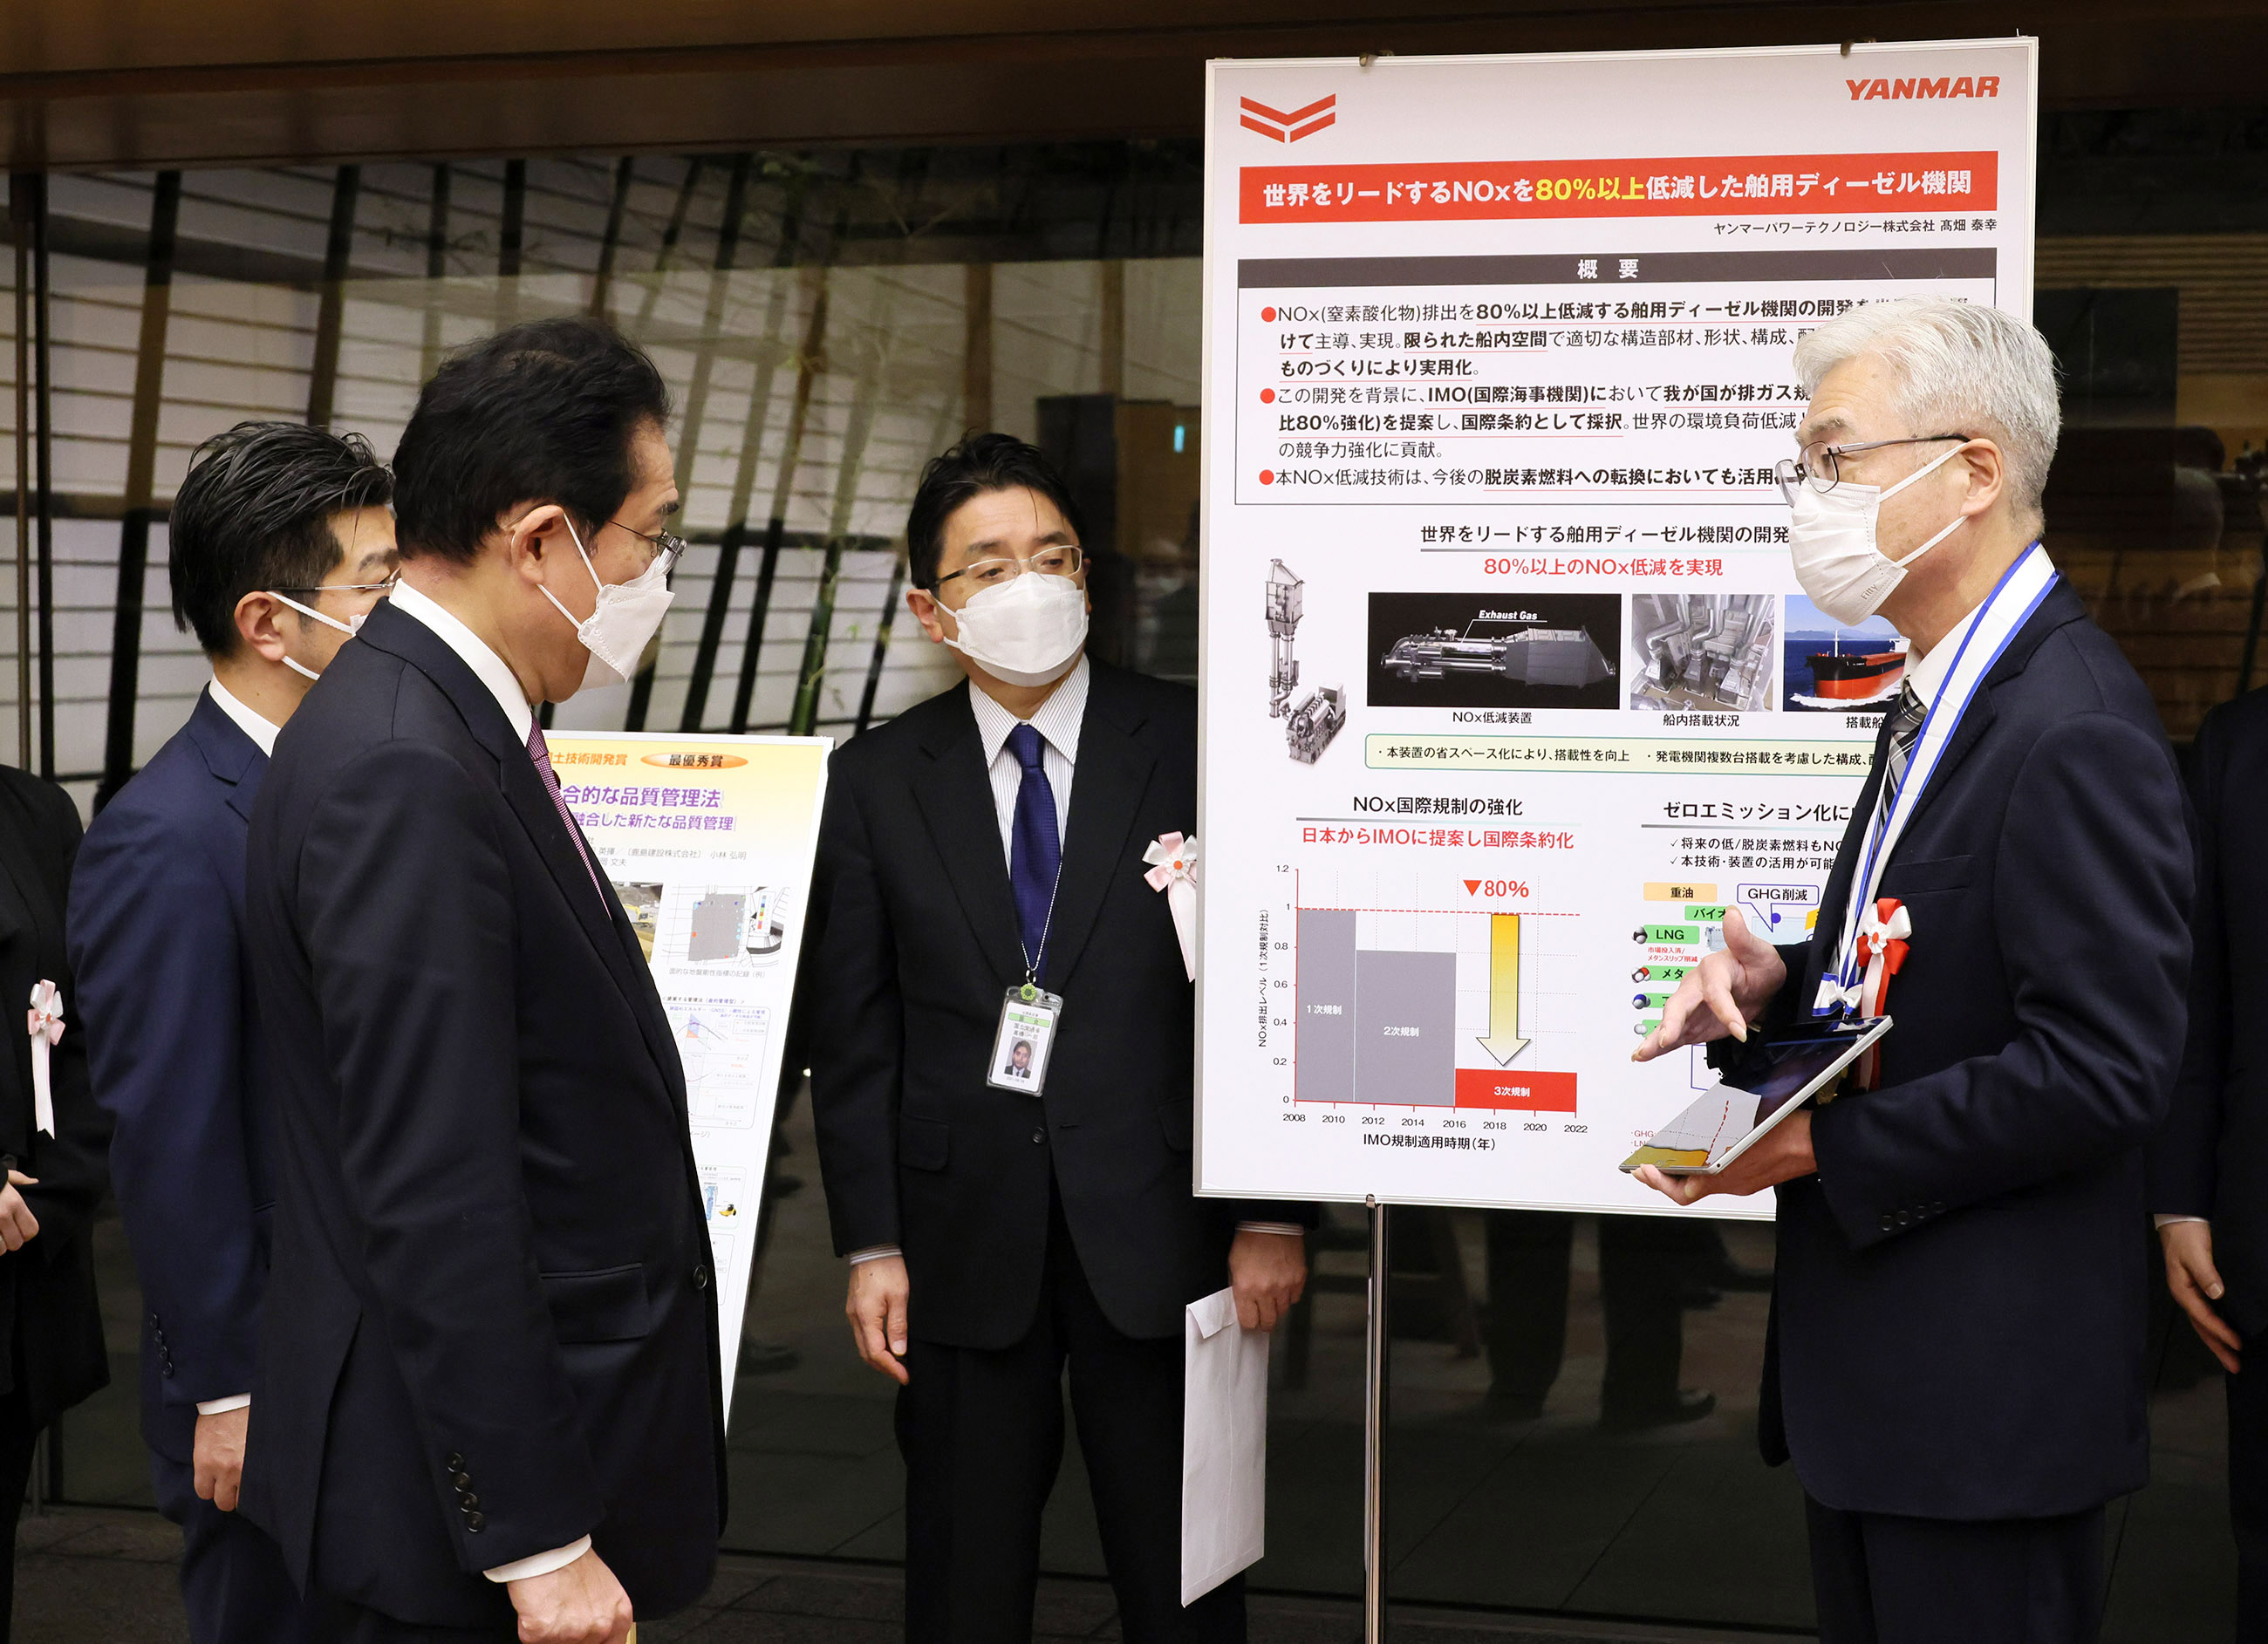 Prime Minister Kishida receiving an explanation on a product sample on display (5)